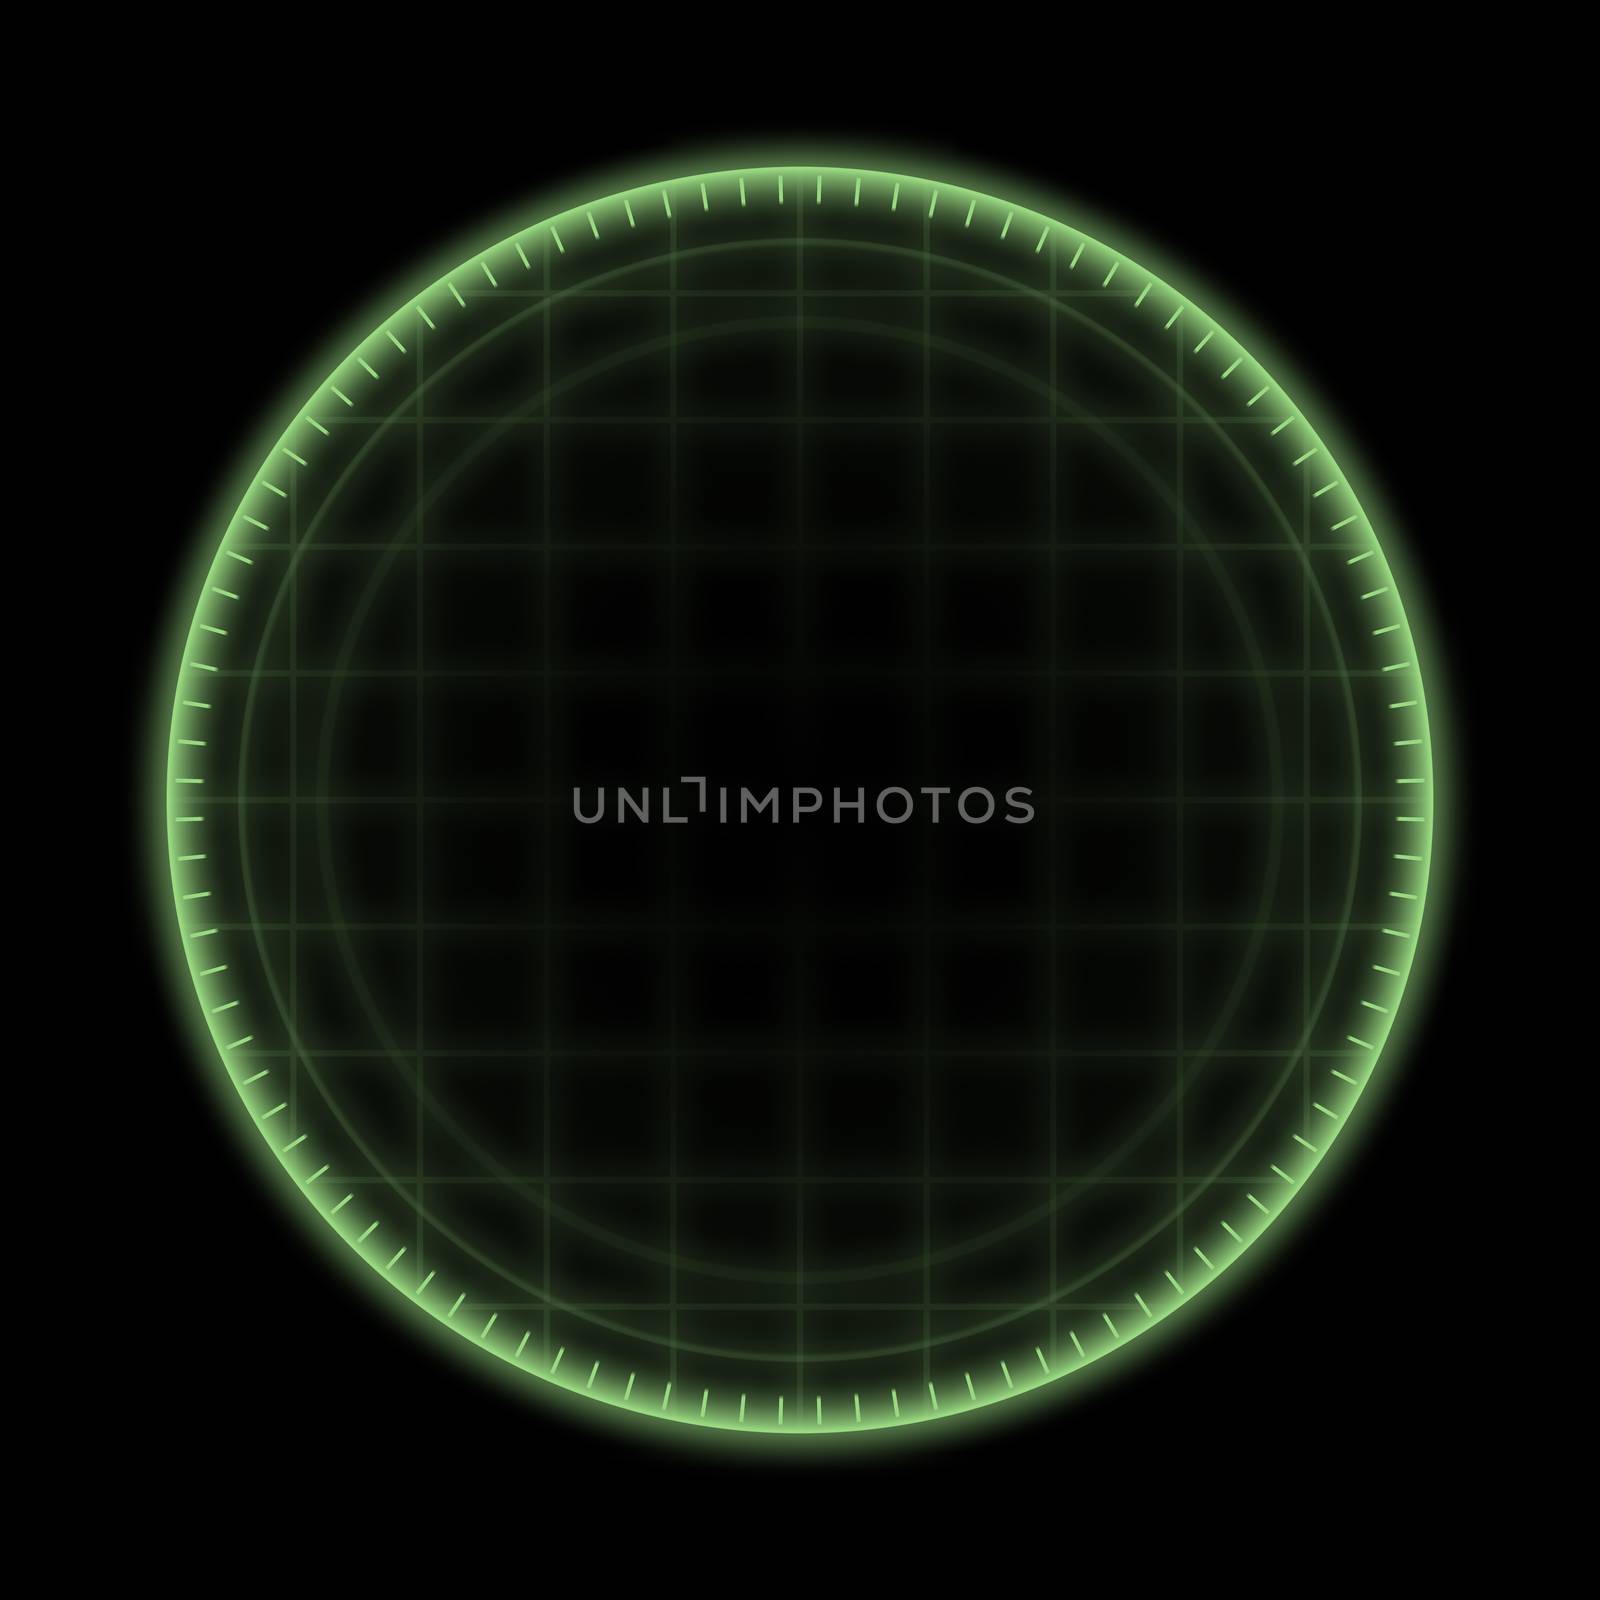 An image of a green radar ring background